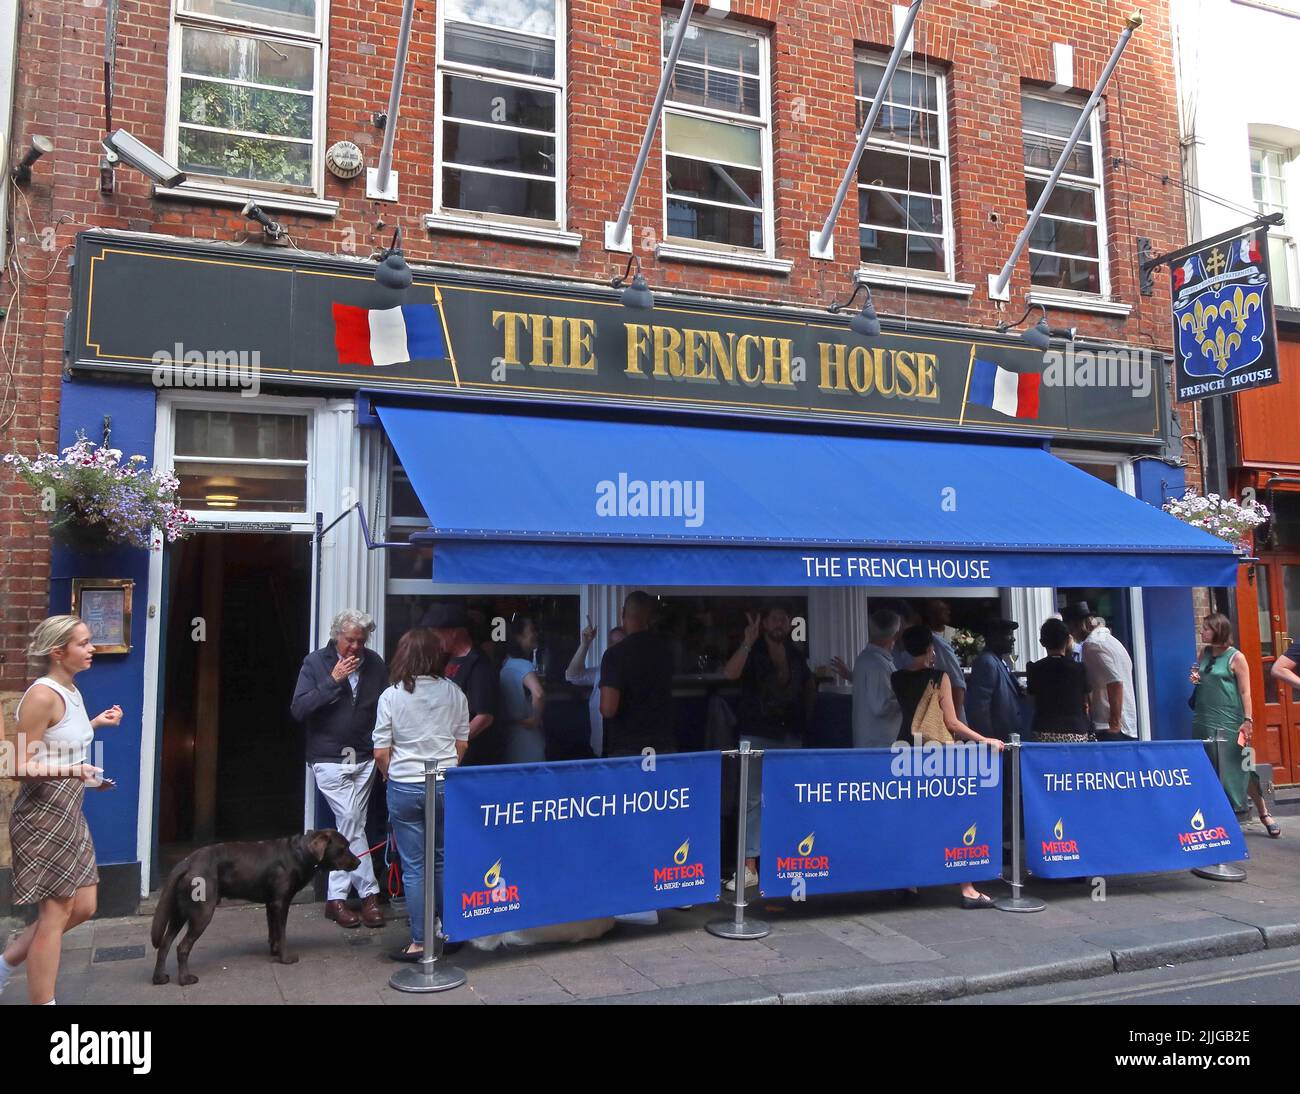 The French House pub, 49 Dean St, Soho, Londres, Angleterre, ROYAUME-UNI, W1D 5BG Banque D'Images